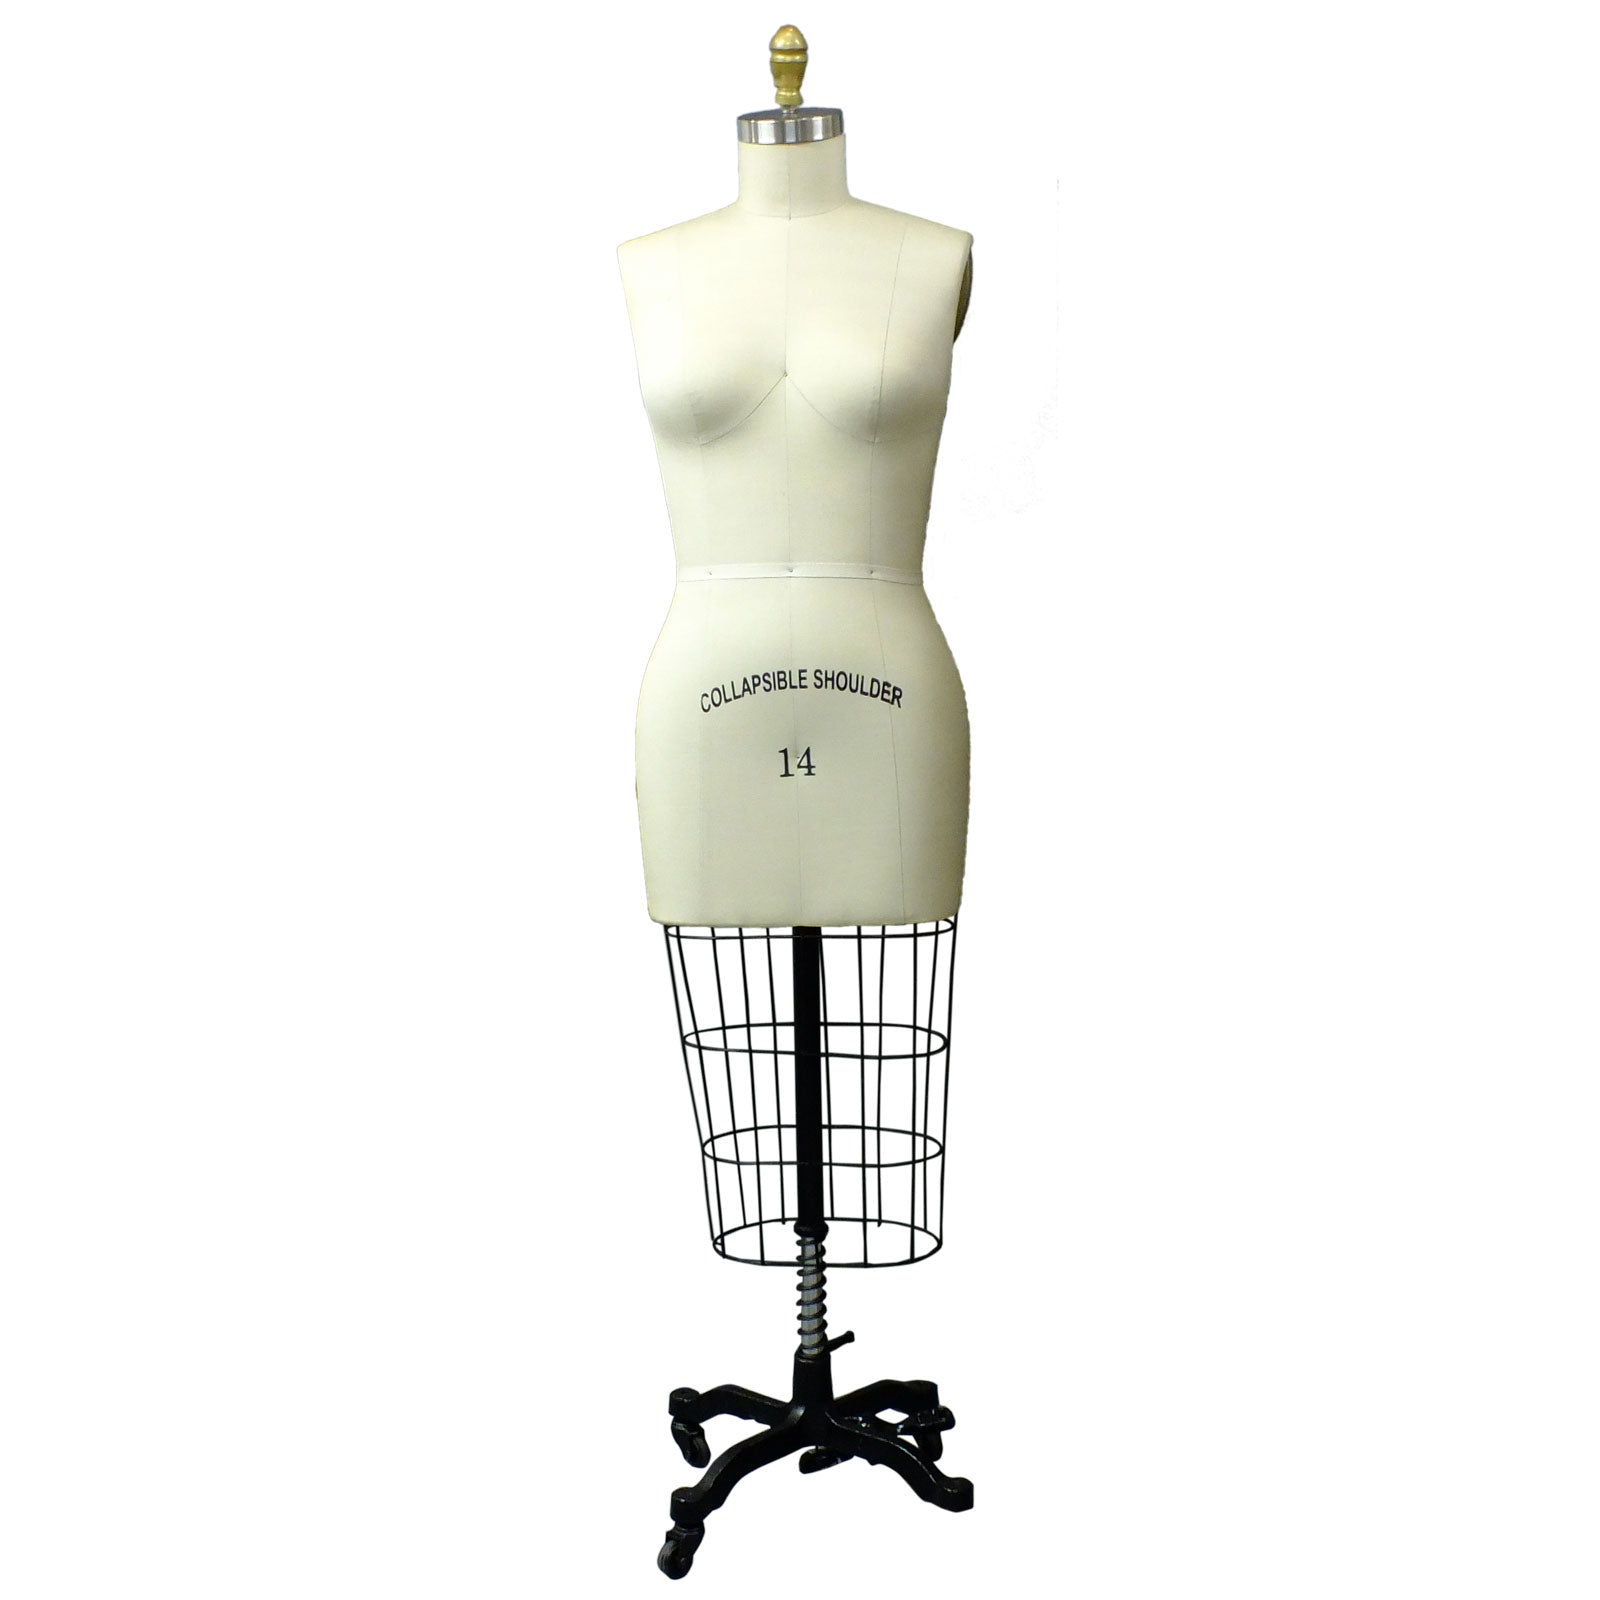 Female Half Body Dress Form with Collapsible Shoulders